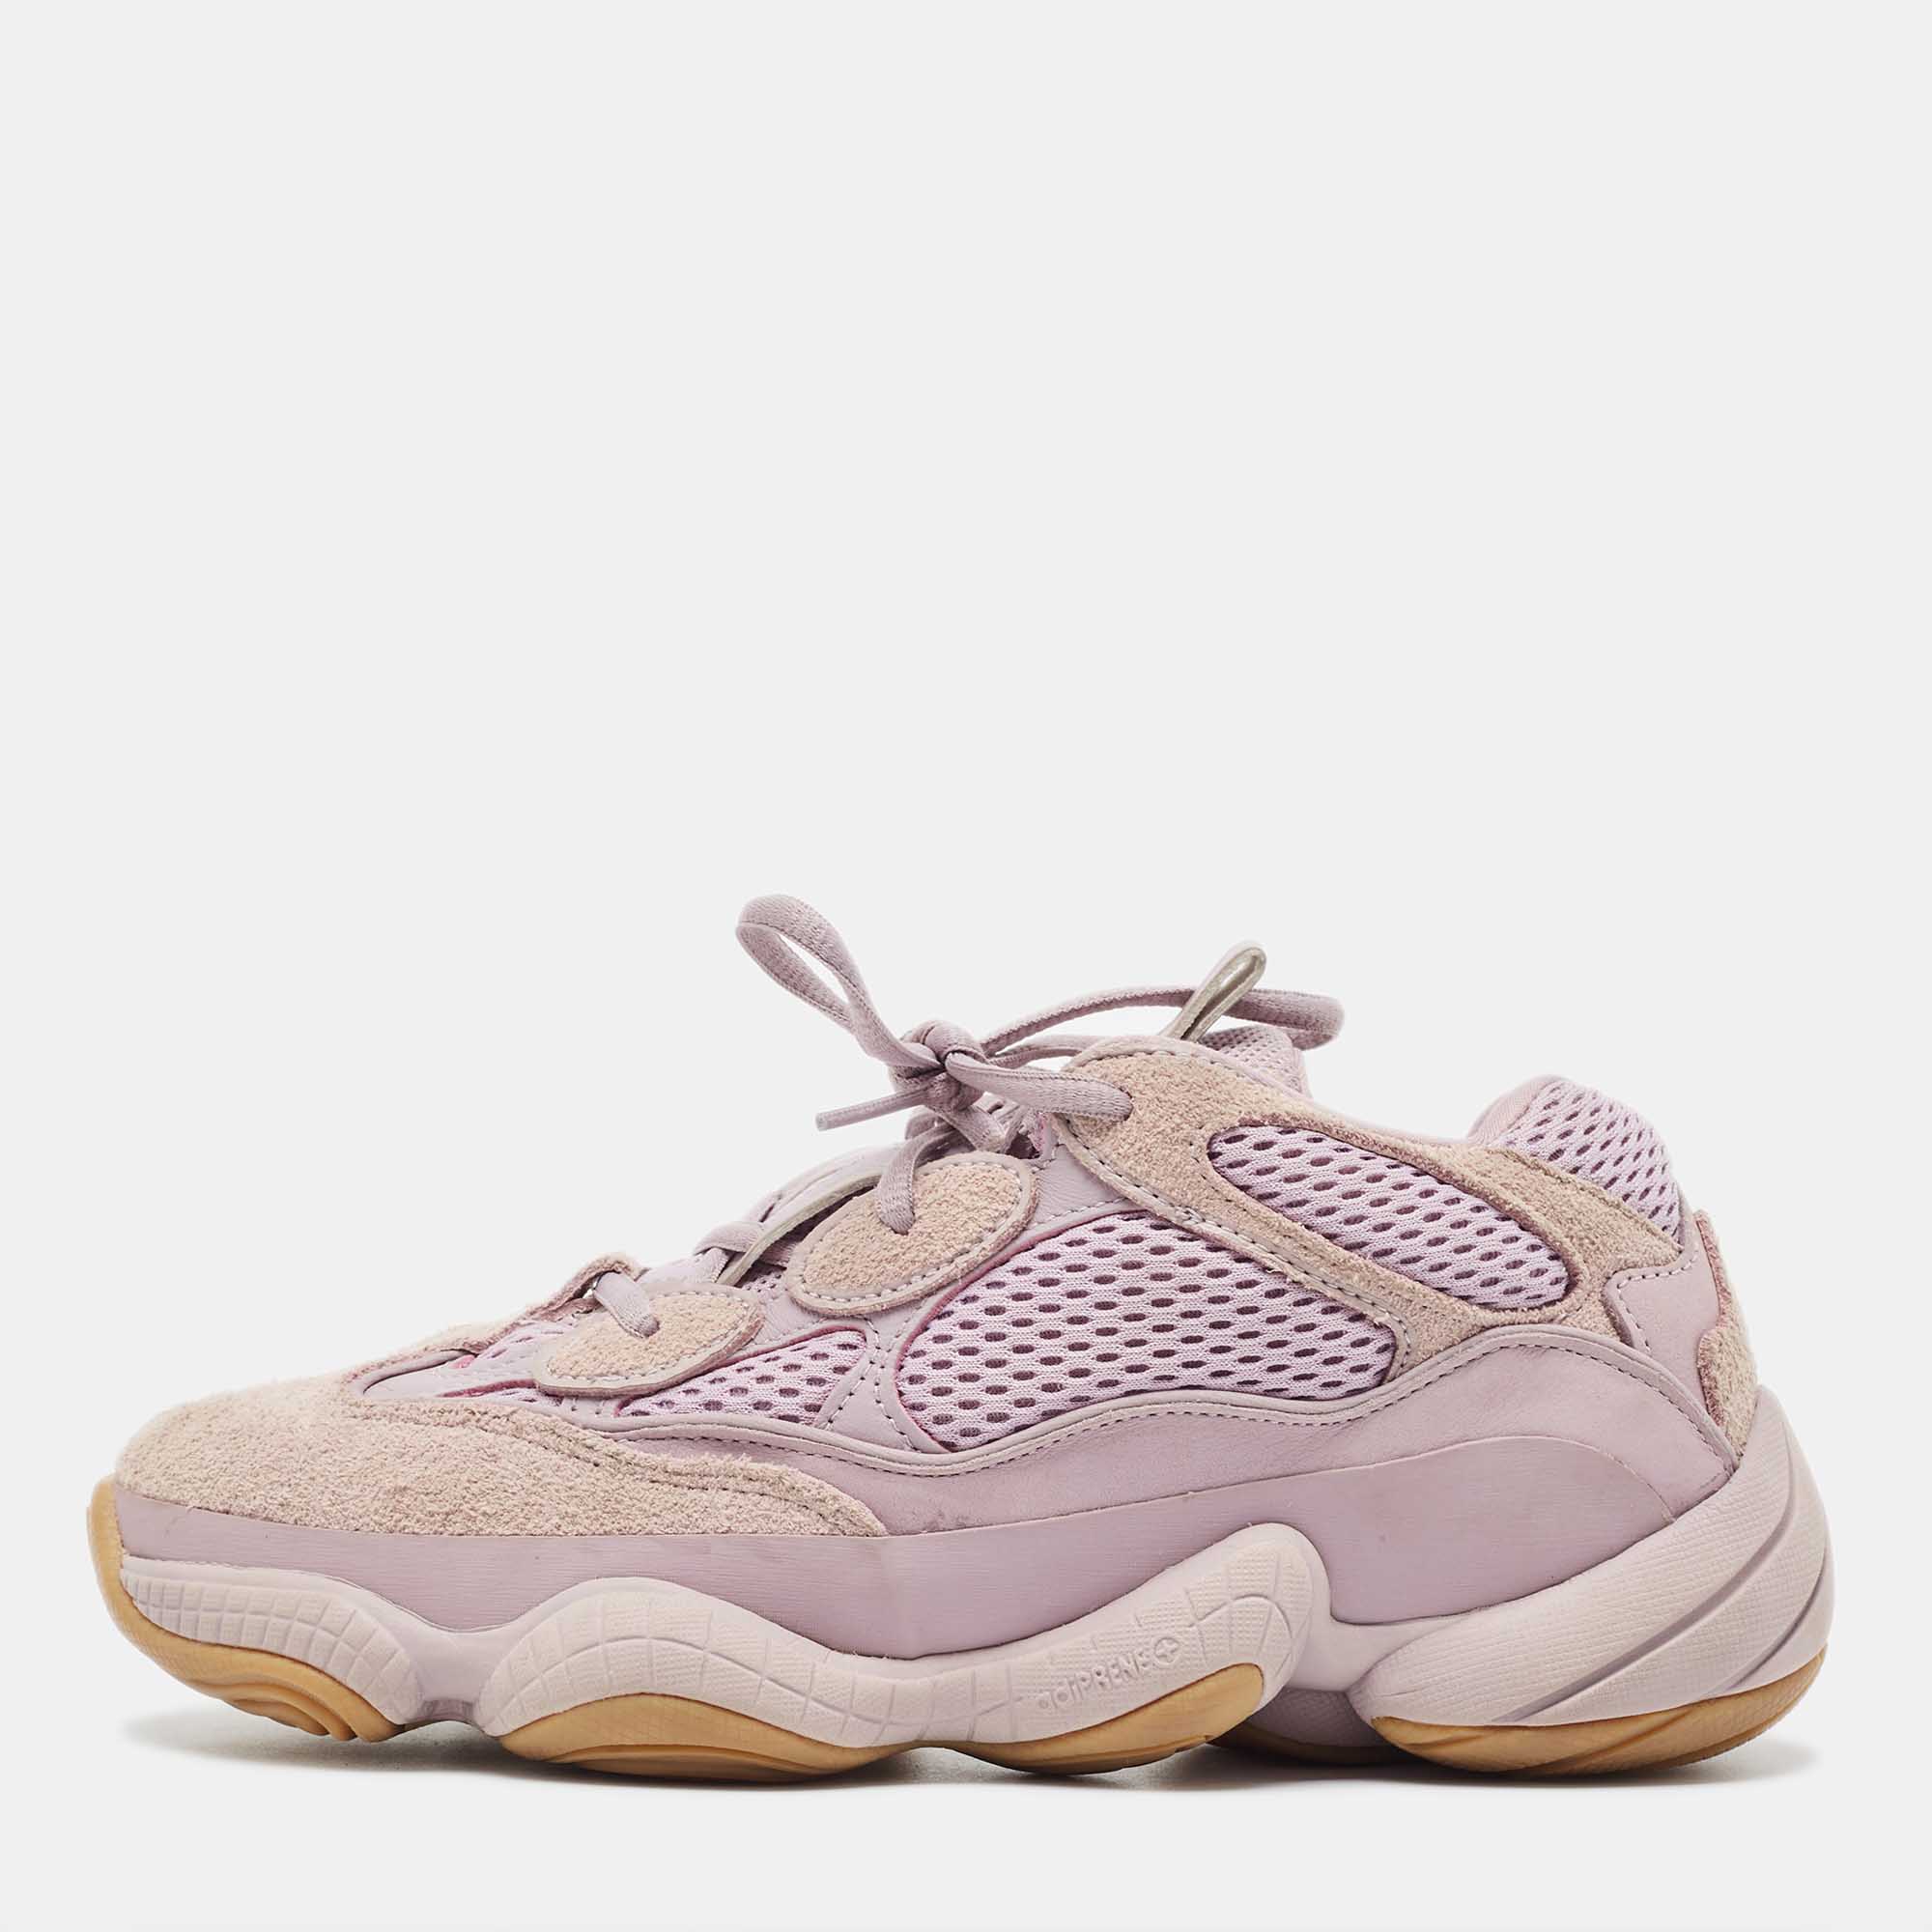 Pre-owned Yeezy X Adidas Adidas X Yeezy Purple Mesh And Suede Boost Yeezy 500 Soft Vision Trainers Size 39.5